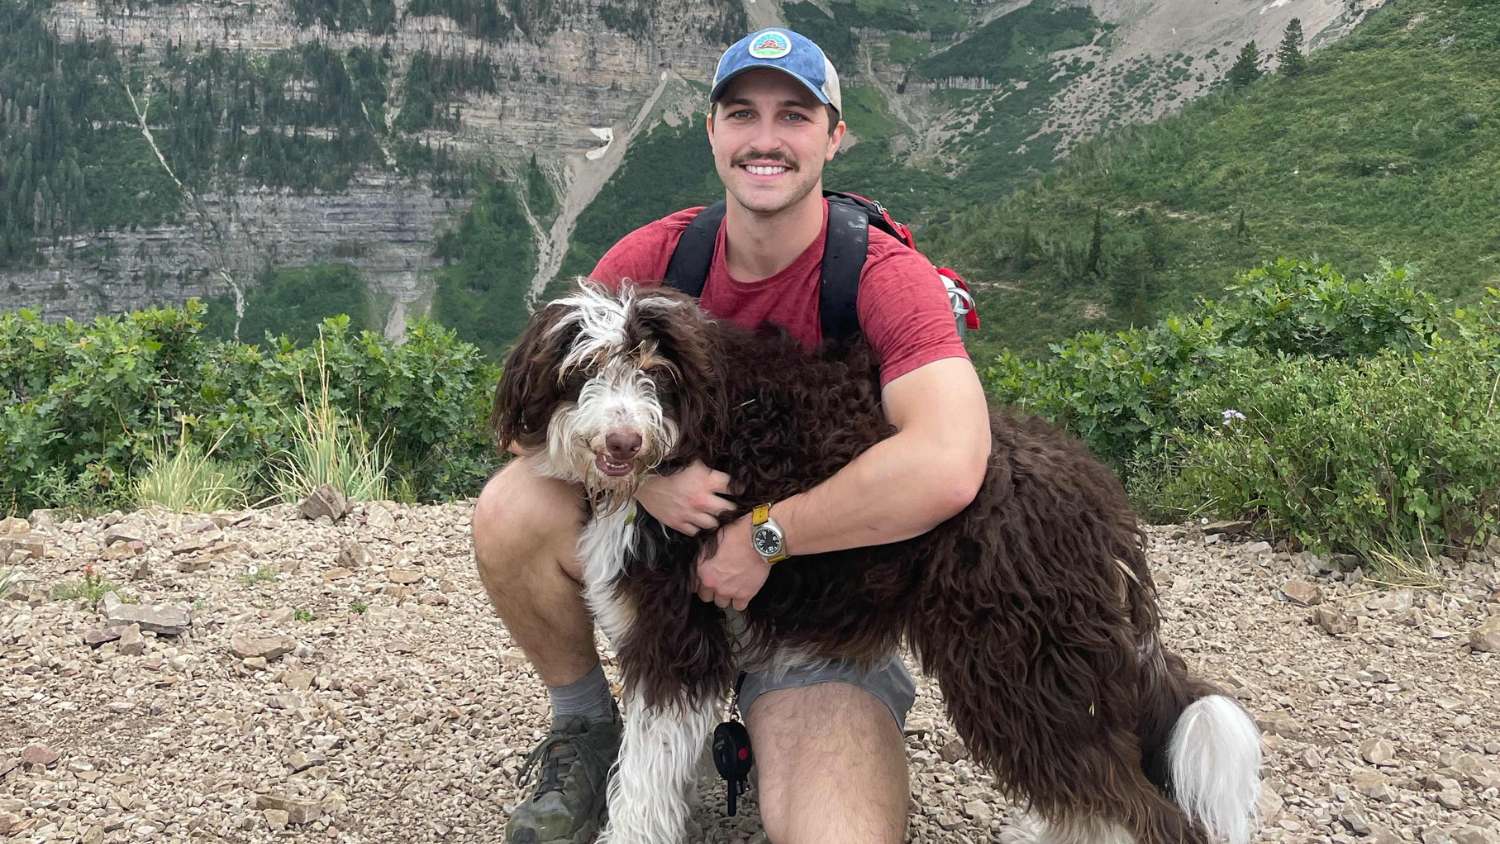 Joshua Lambert poses with his dog in front of a mountain.